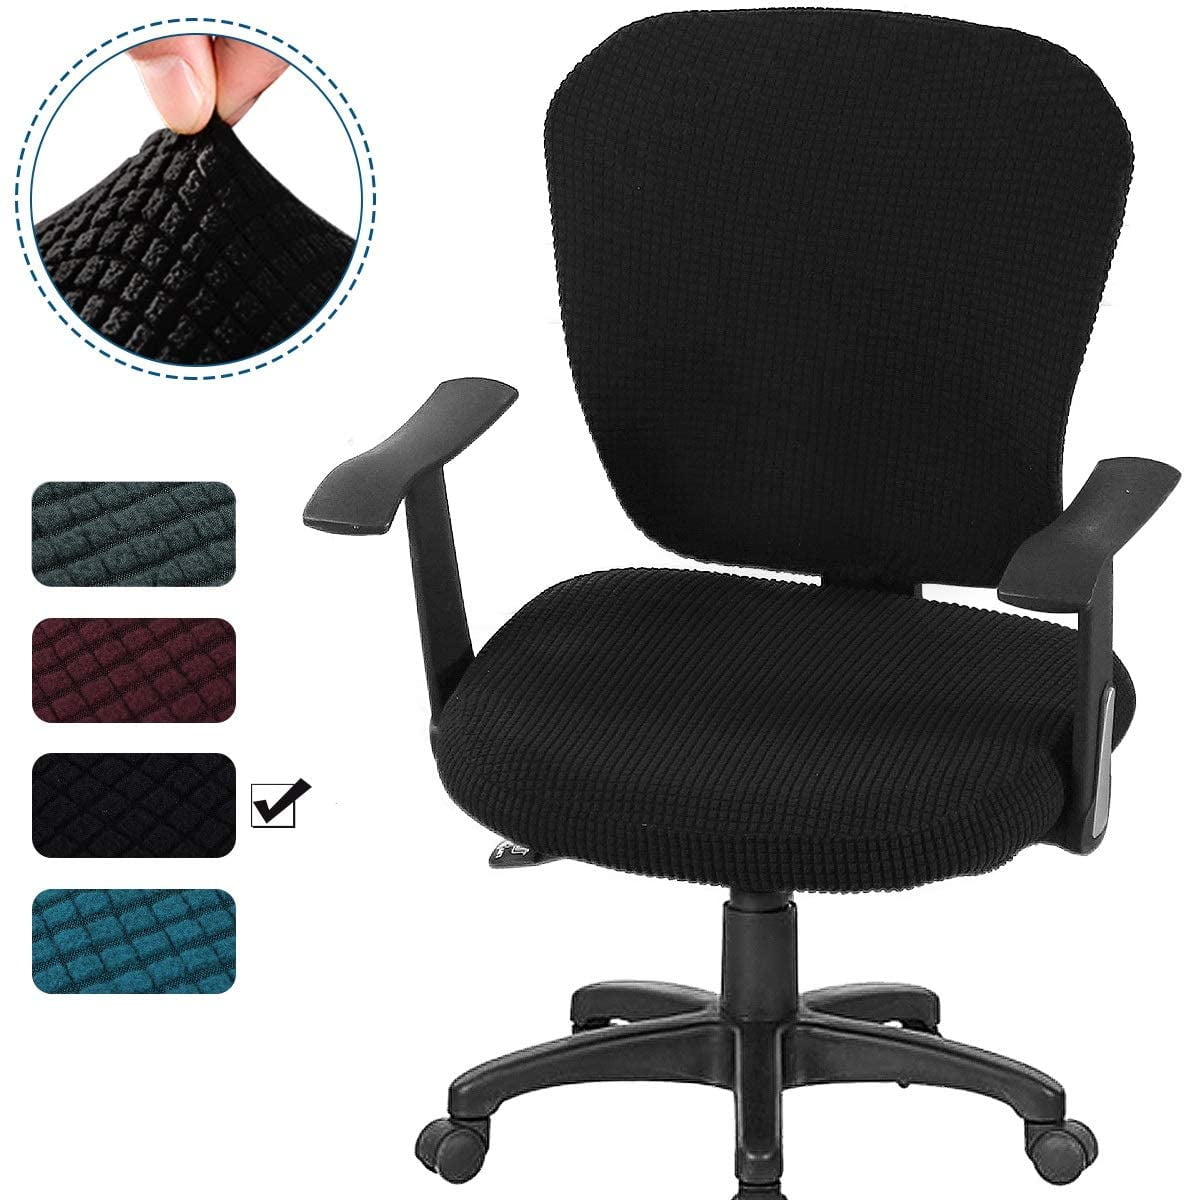 Swivel Seat Computer Chair Cover Protector Seat Cover US Stretch Office Spandex 